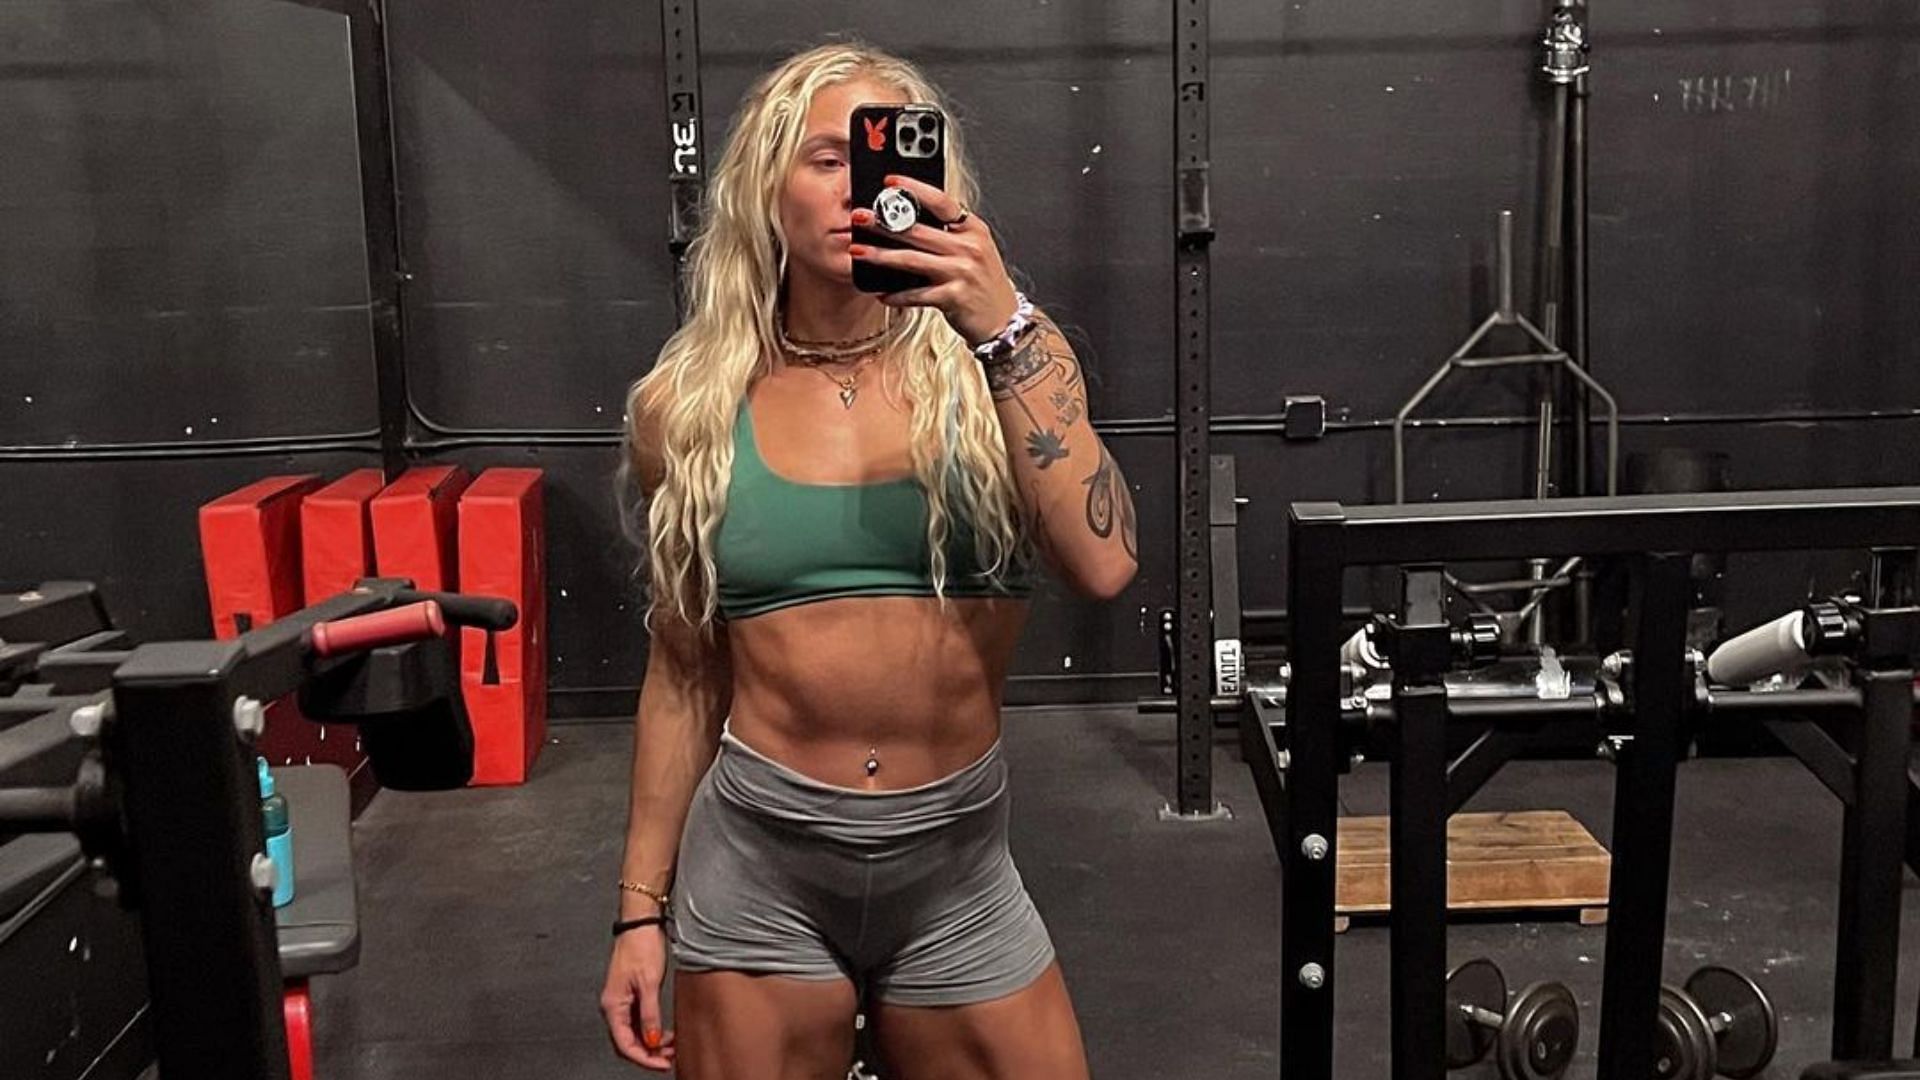 The WWE star is just 24-year-old.